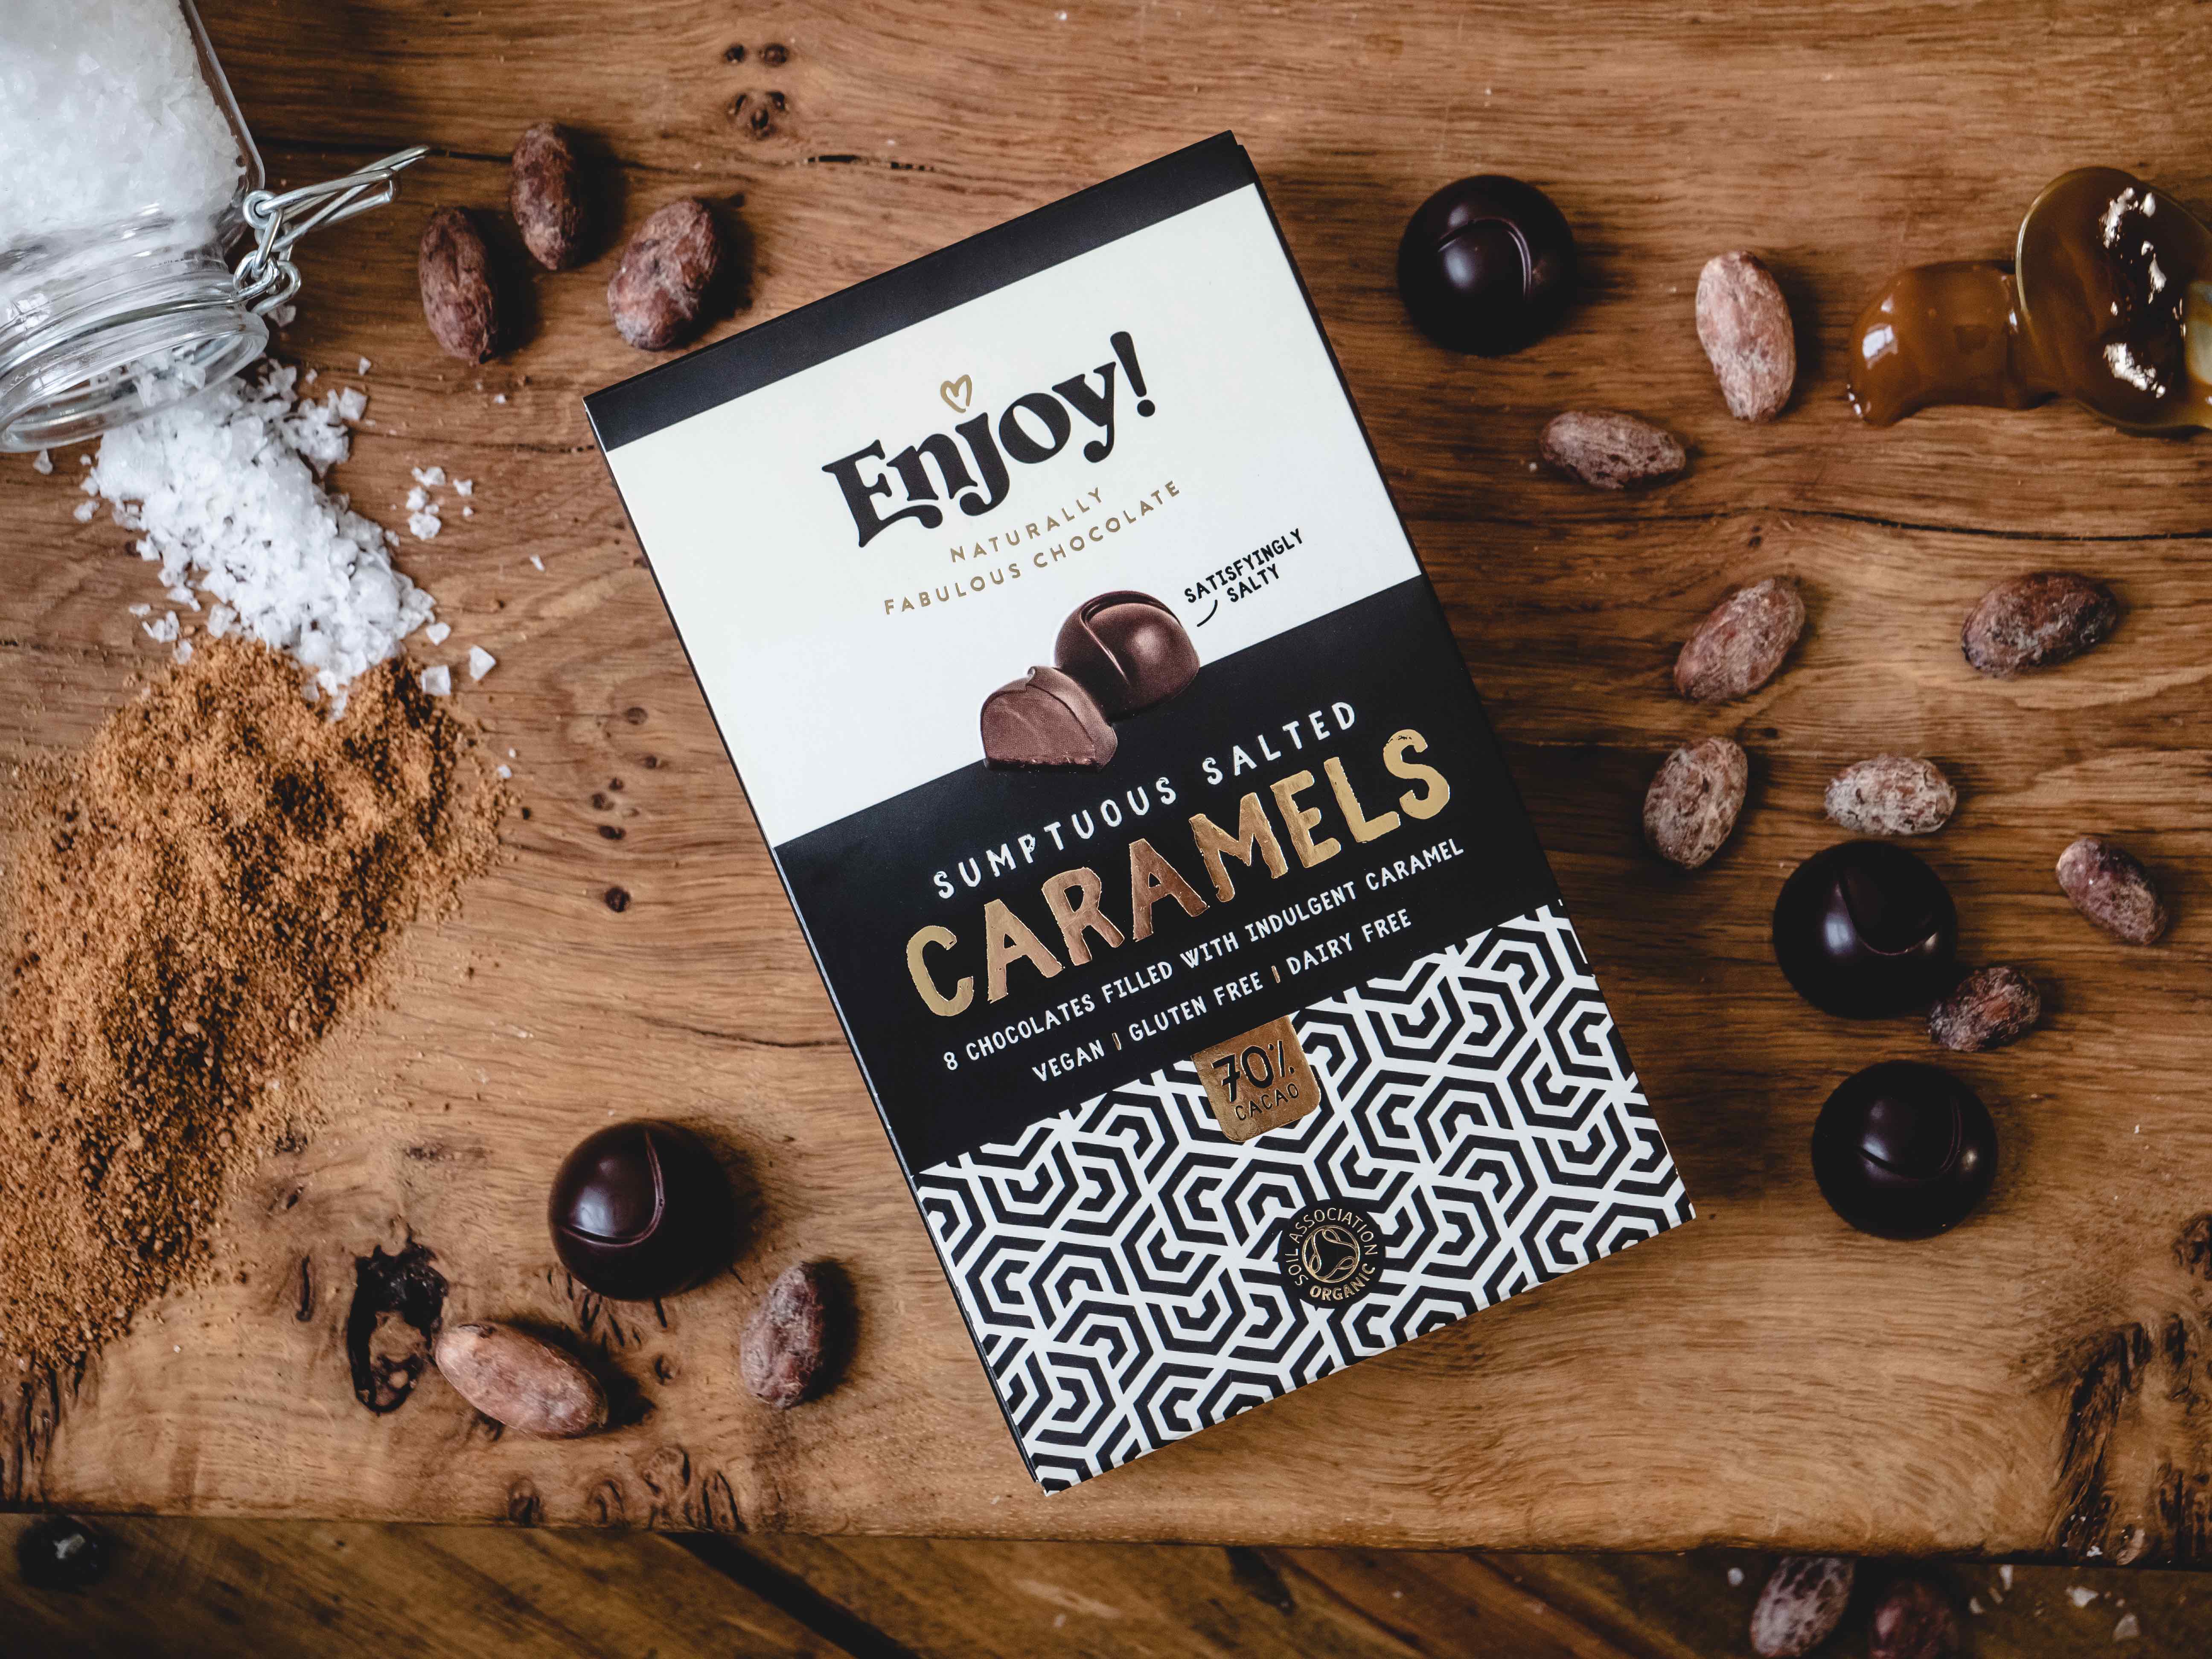 Enjoy! The brand new free-from chocolates giving us a sweet tooth - Sumptuous Salted Caramels